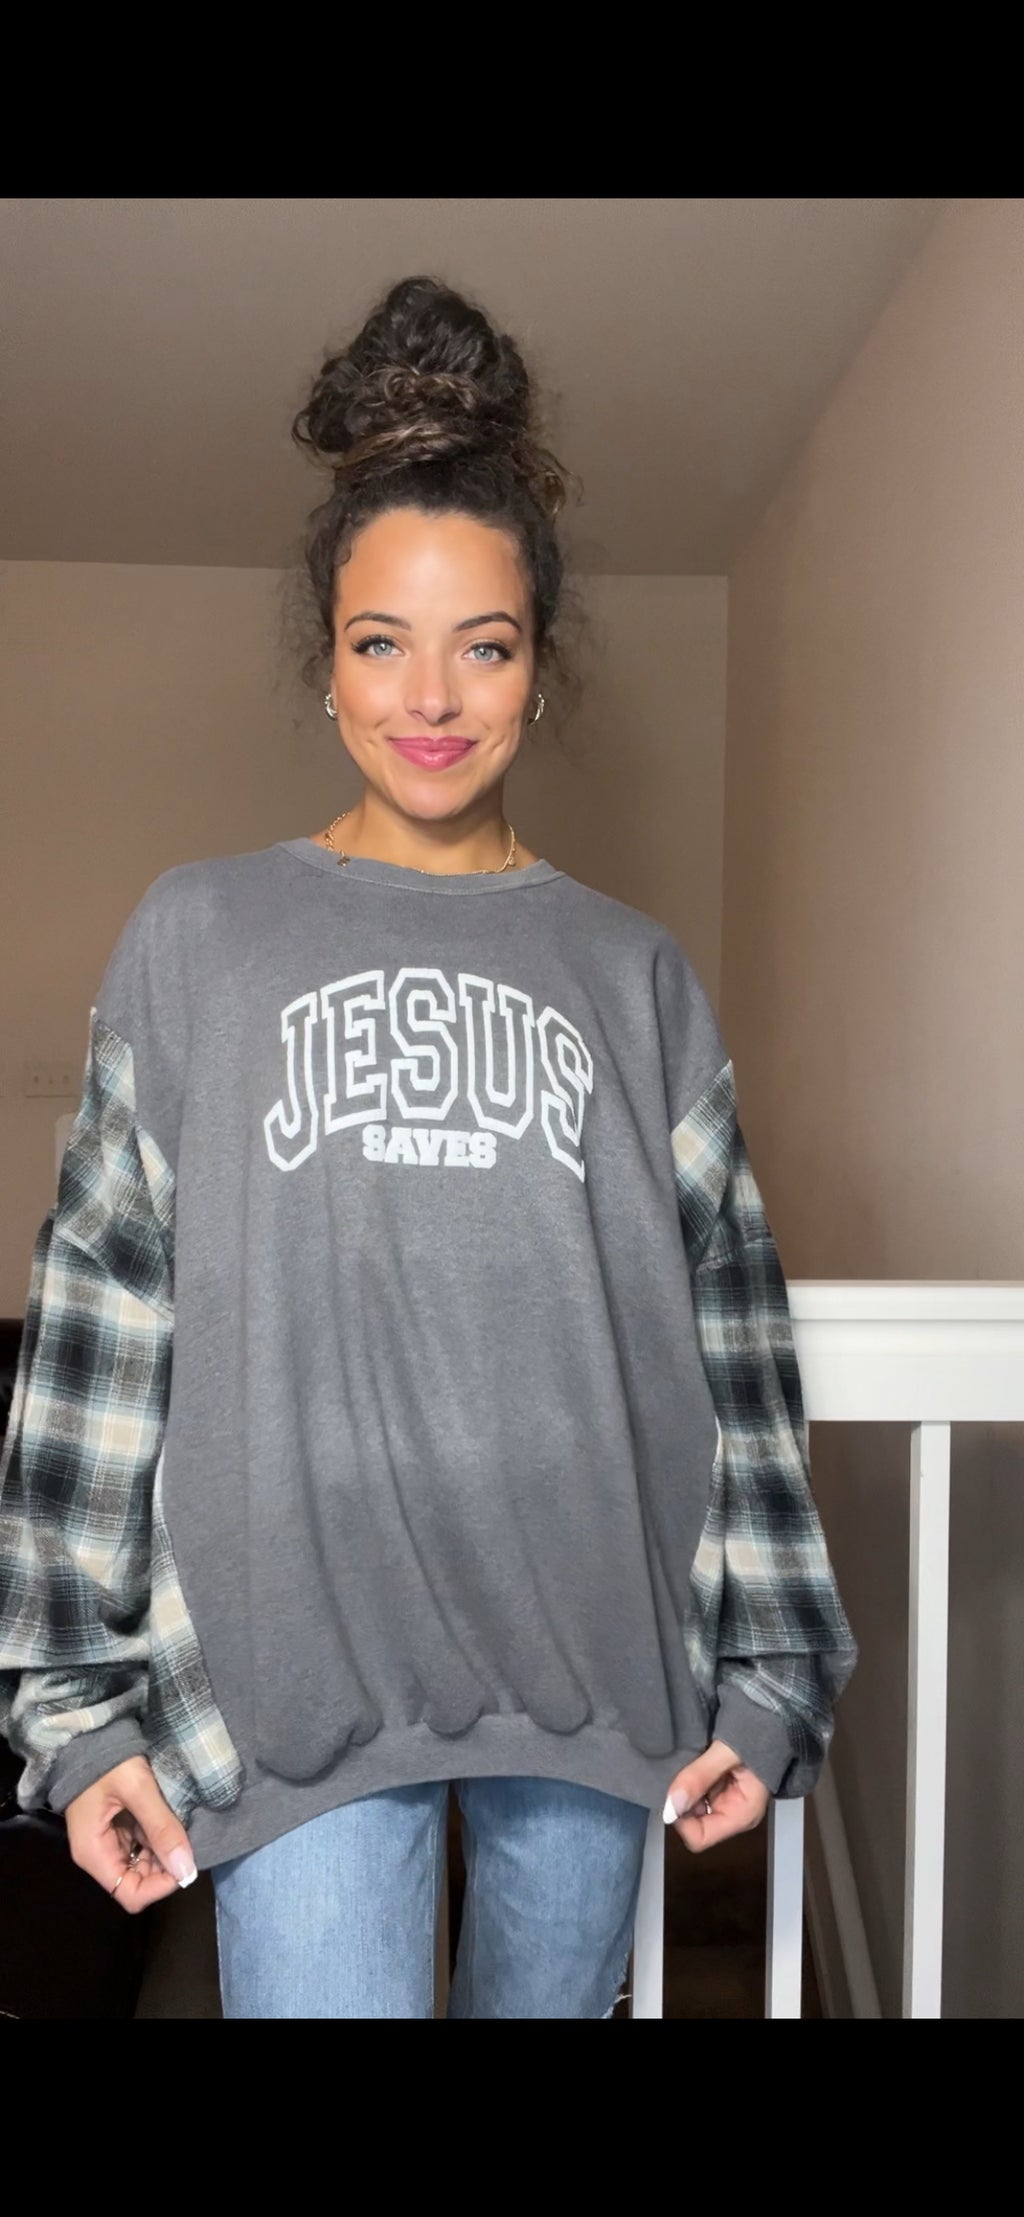 Jesus Saves - woman’s 2X/3X - midweight sweatshirt with flannel sleeves ￼